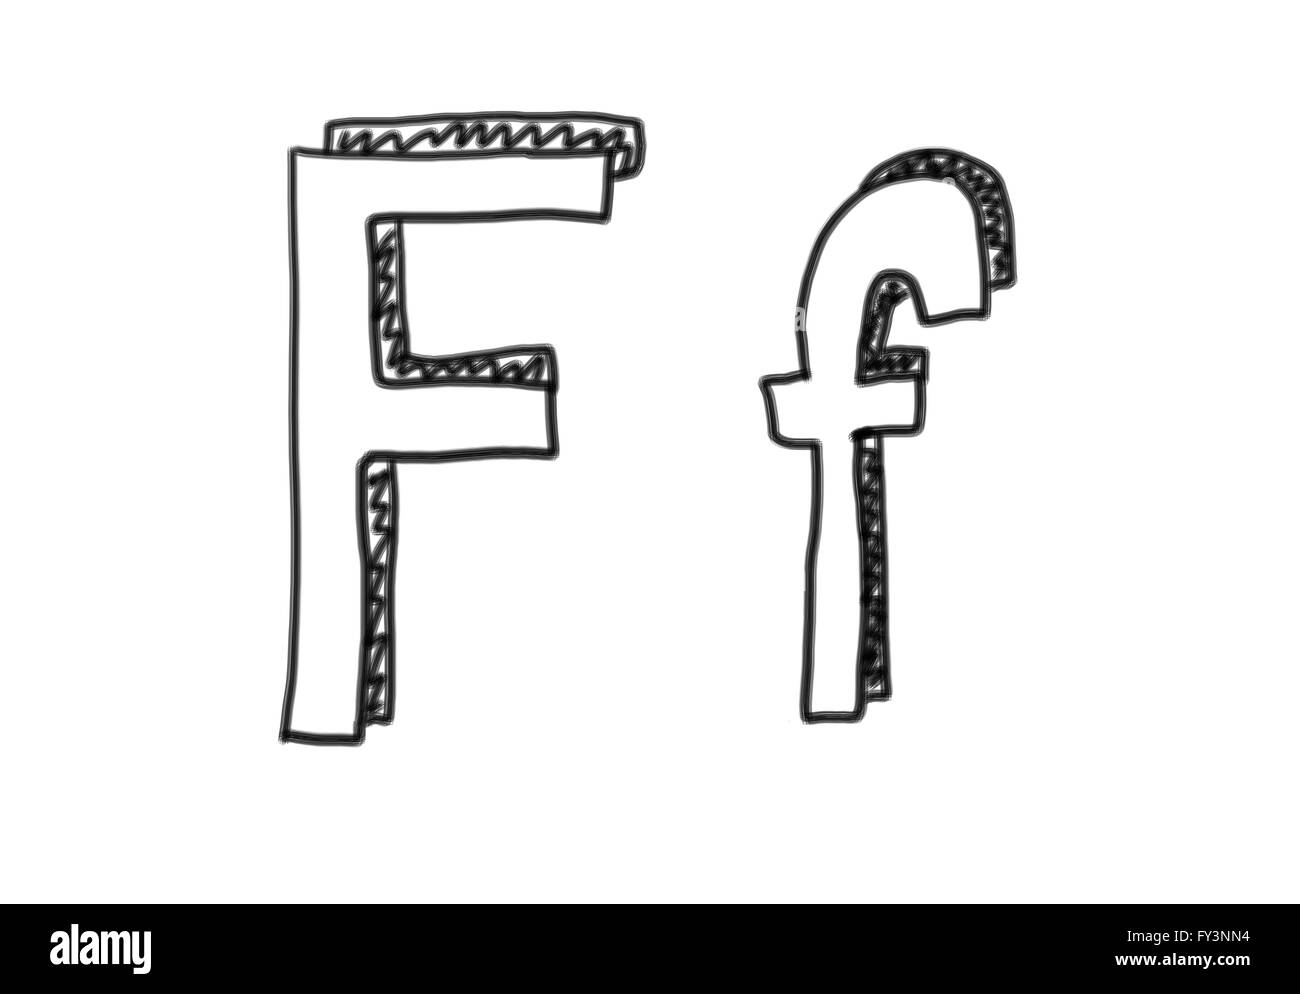 New drawing Character F of alphabet logo icon in design elements. Stock Photo